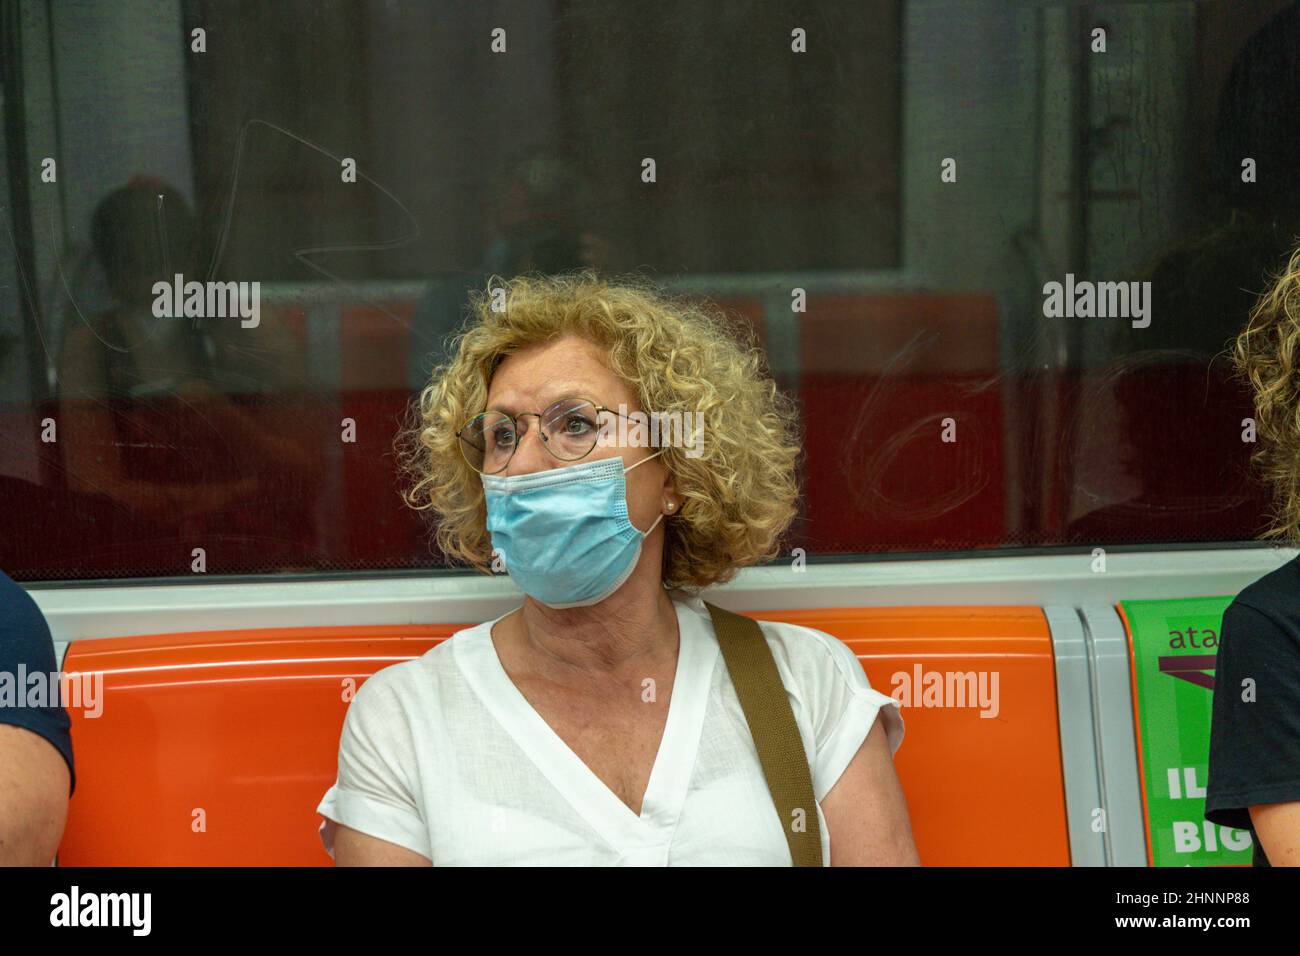 people in the Metro protect themselves by wearing a medical mask in Rome, Italy Stock Photo